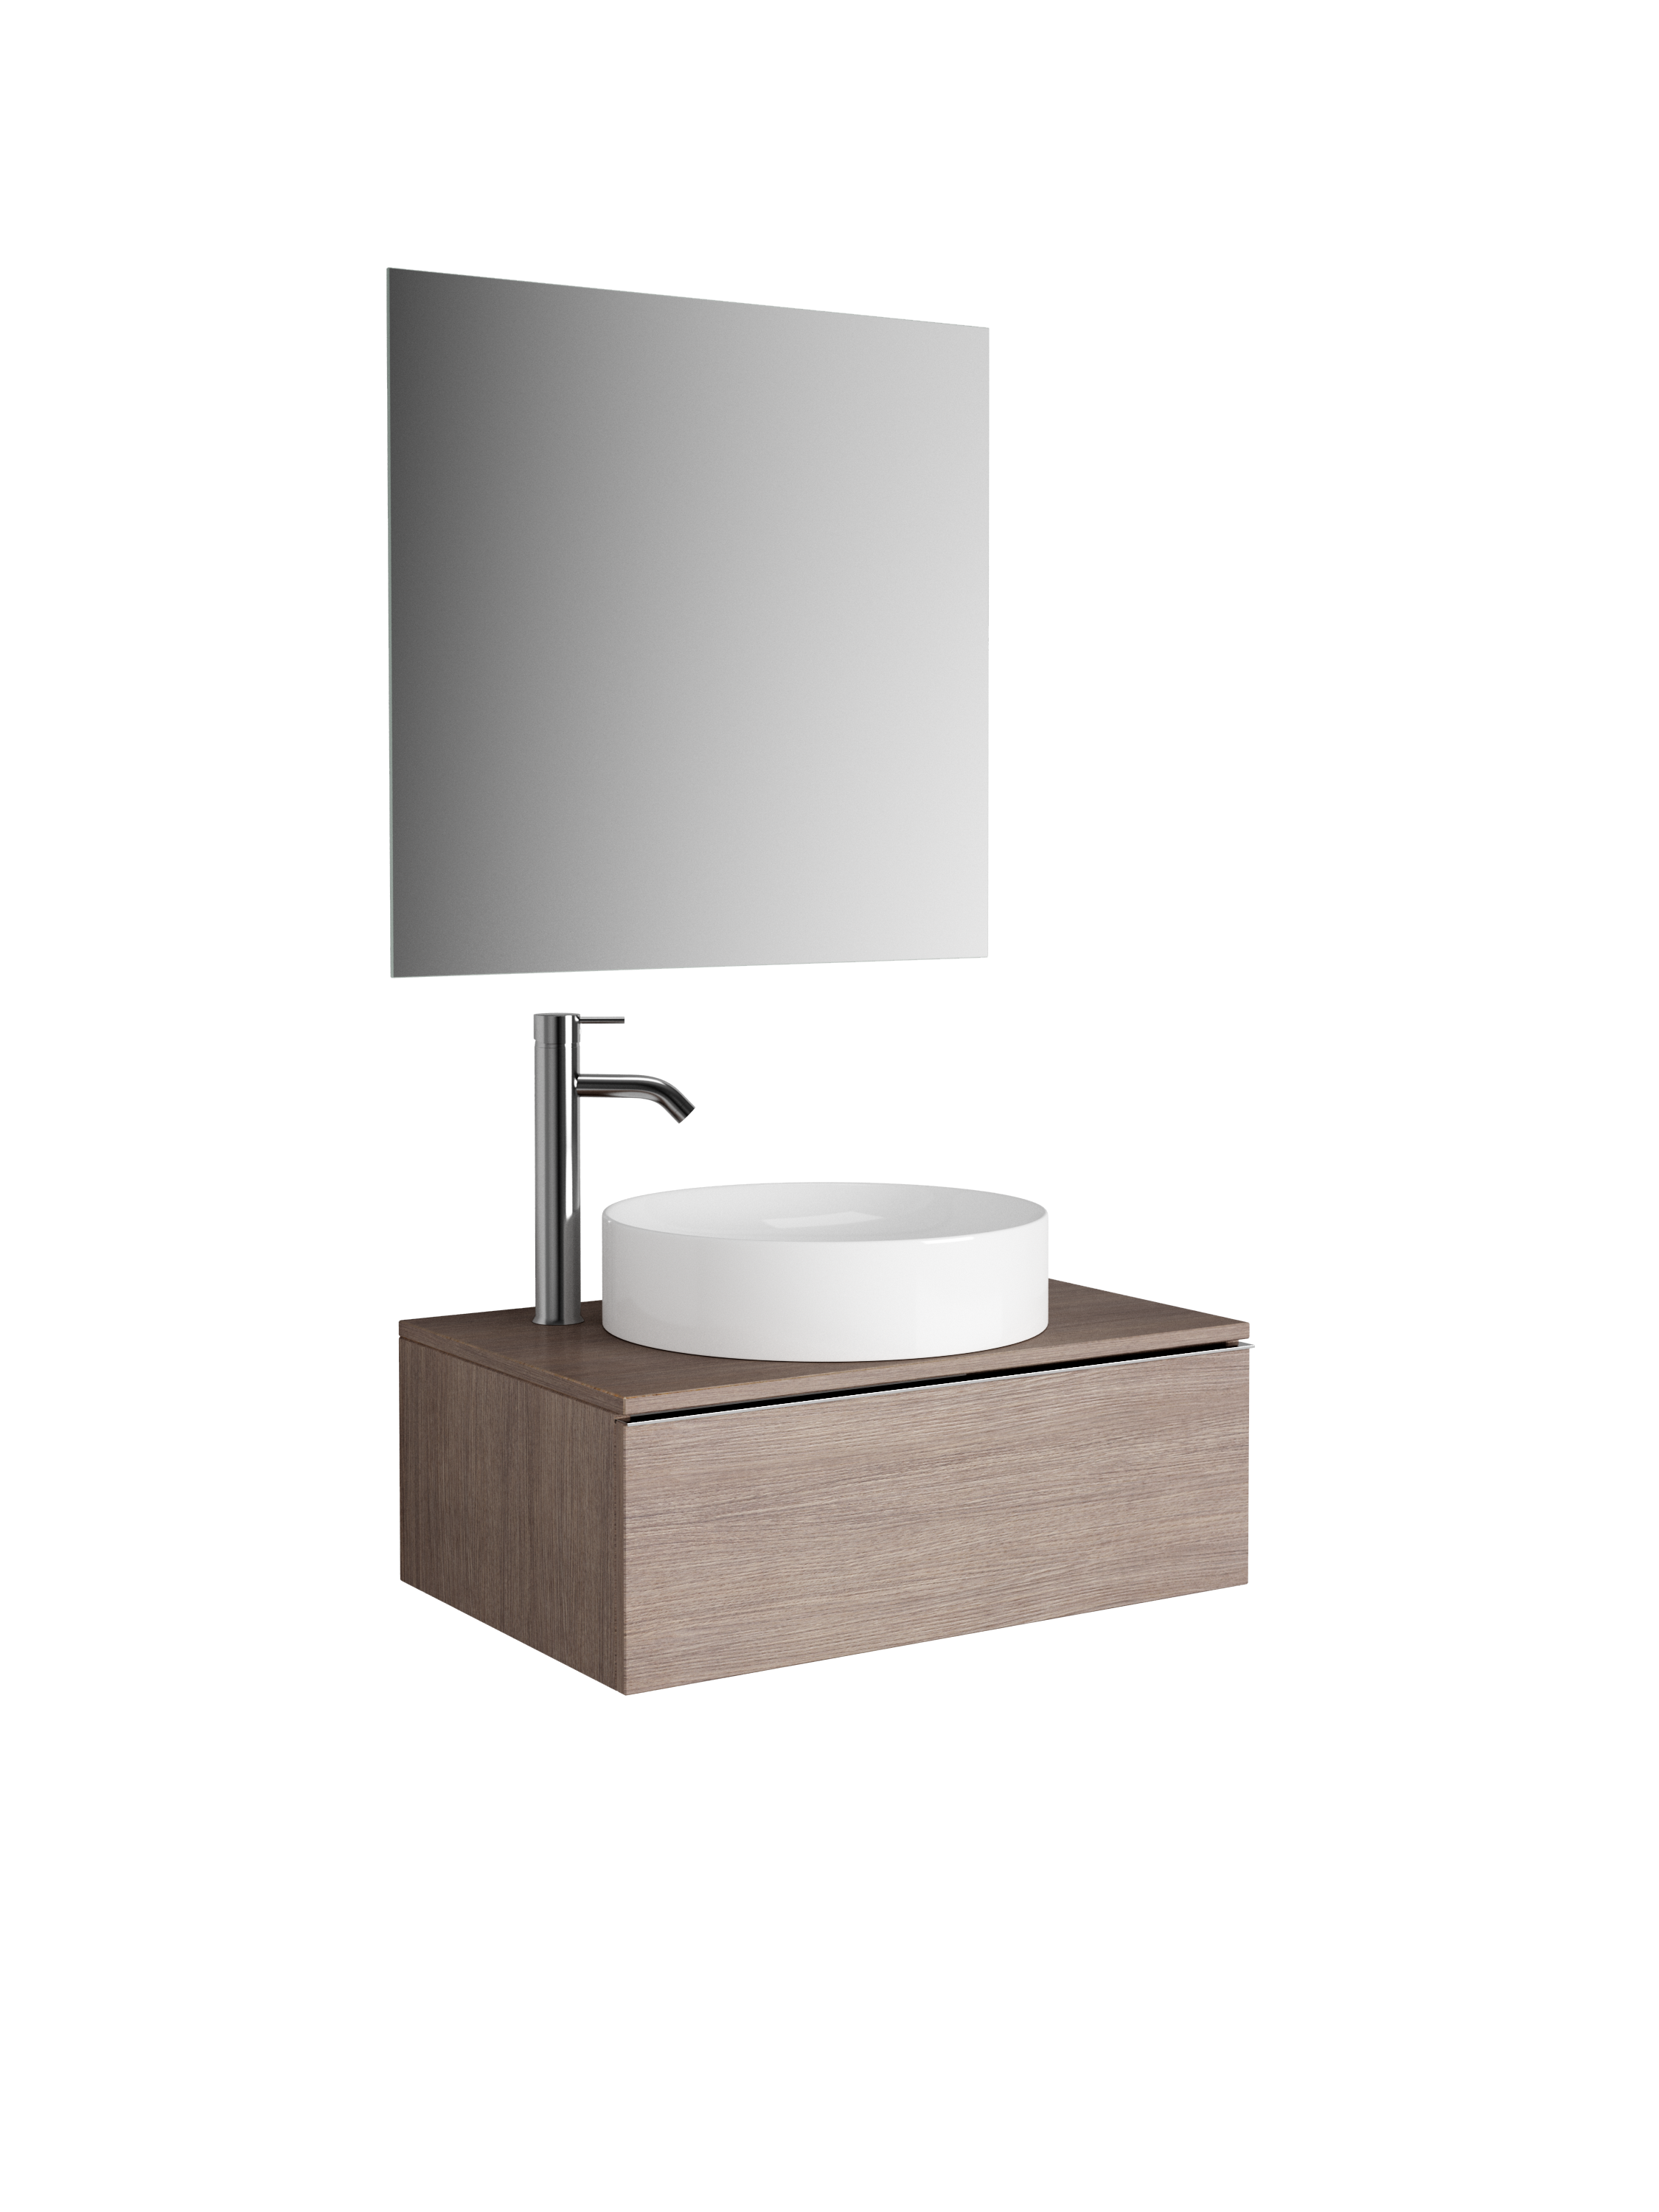 DAX 28" Surfside single Vanity Cabinet without trap. Oak (DAX-SURF022814)DAX 28" Surfside single Vanity Cabinet without trap. Grey (DAX-SURF022816)